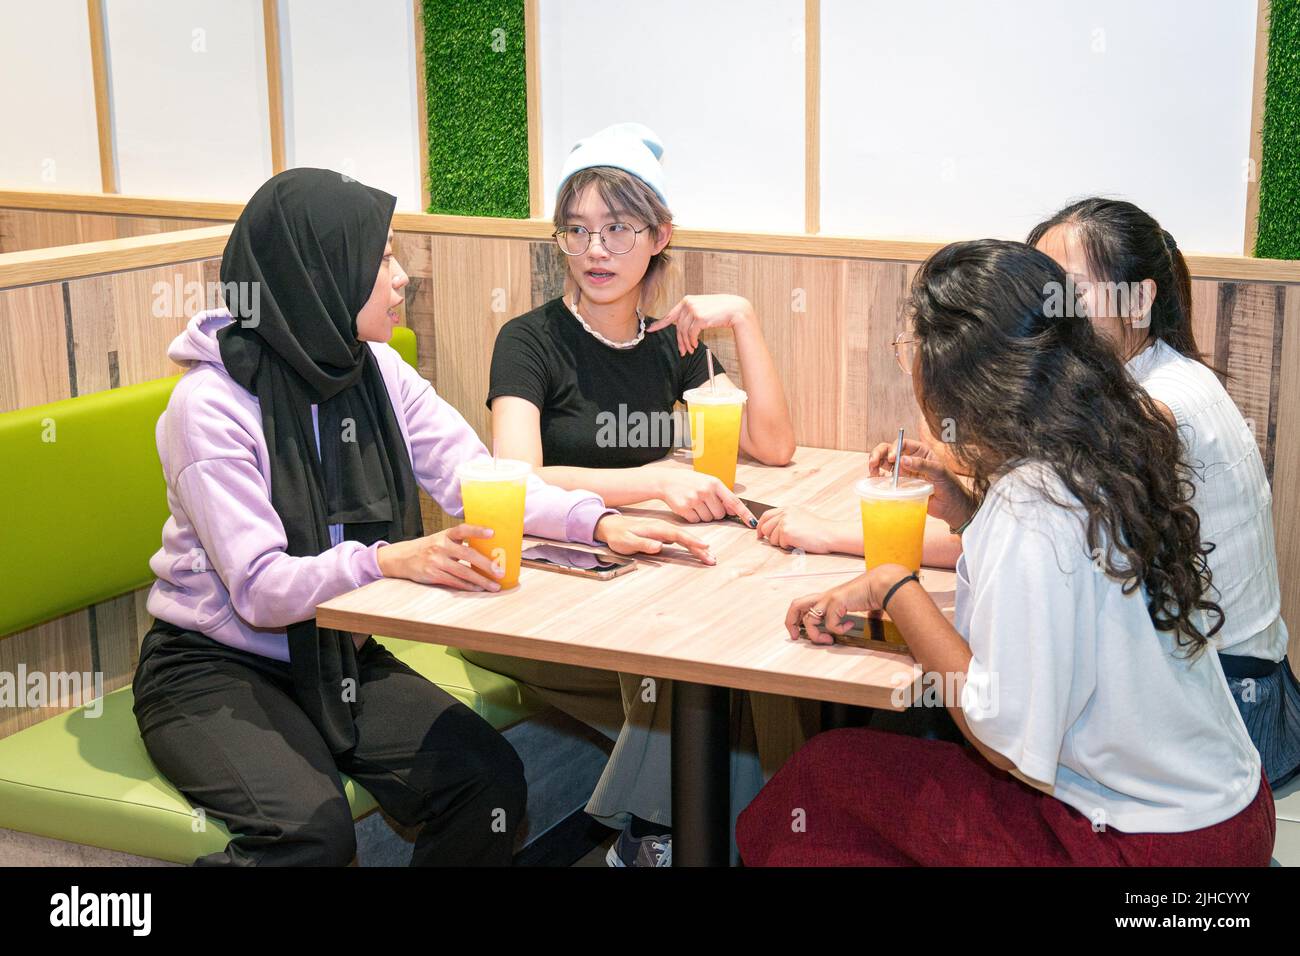 Young Asian women having a great time in a cafe. Drinking orange juice and socializing. Stock Photo